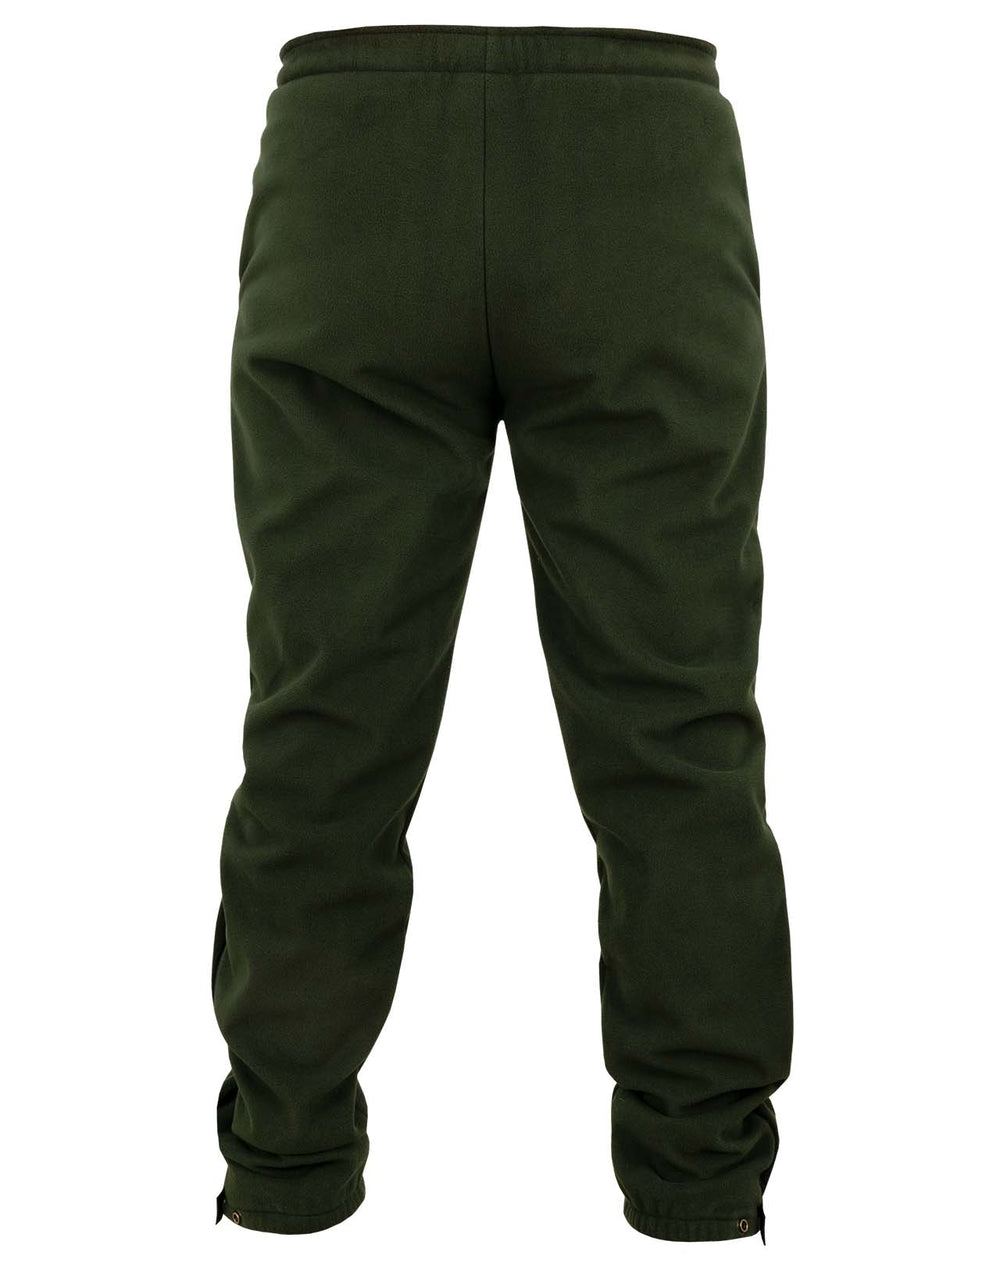 NWT All in Motion Men's All-in Pants 4-Way Stretch Quick Dry Olive Green XXL